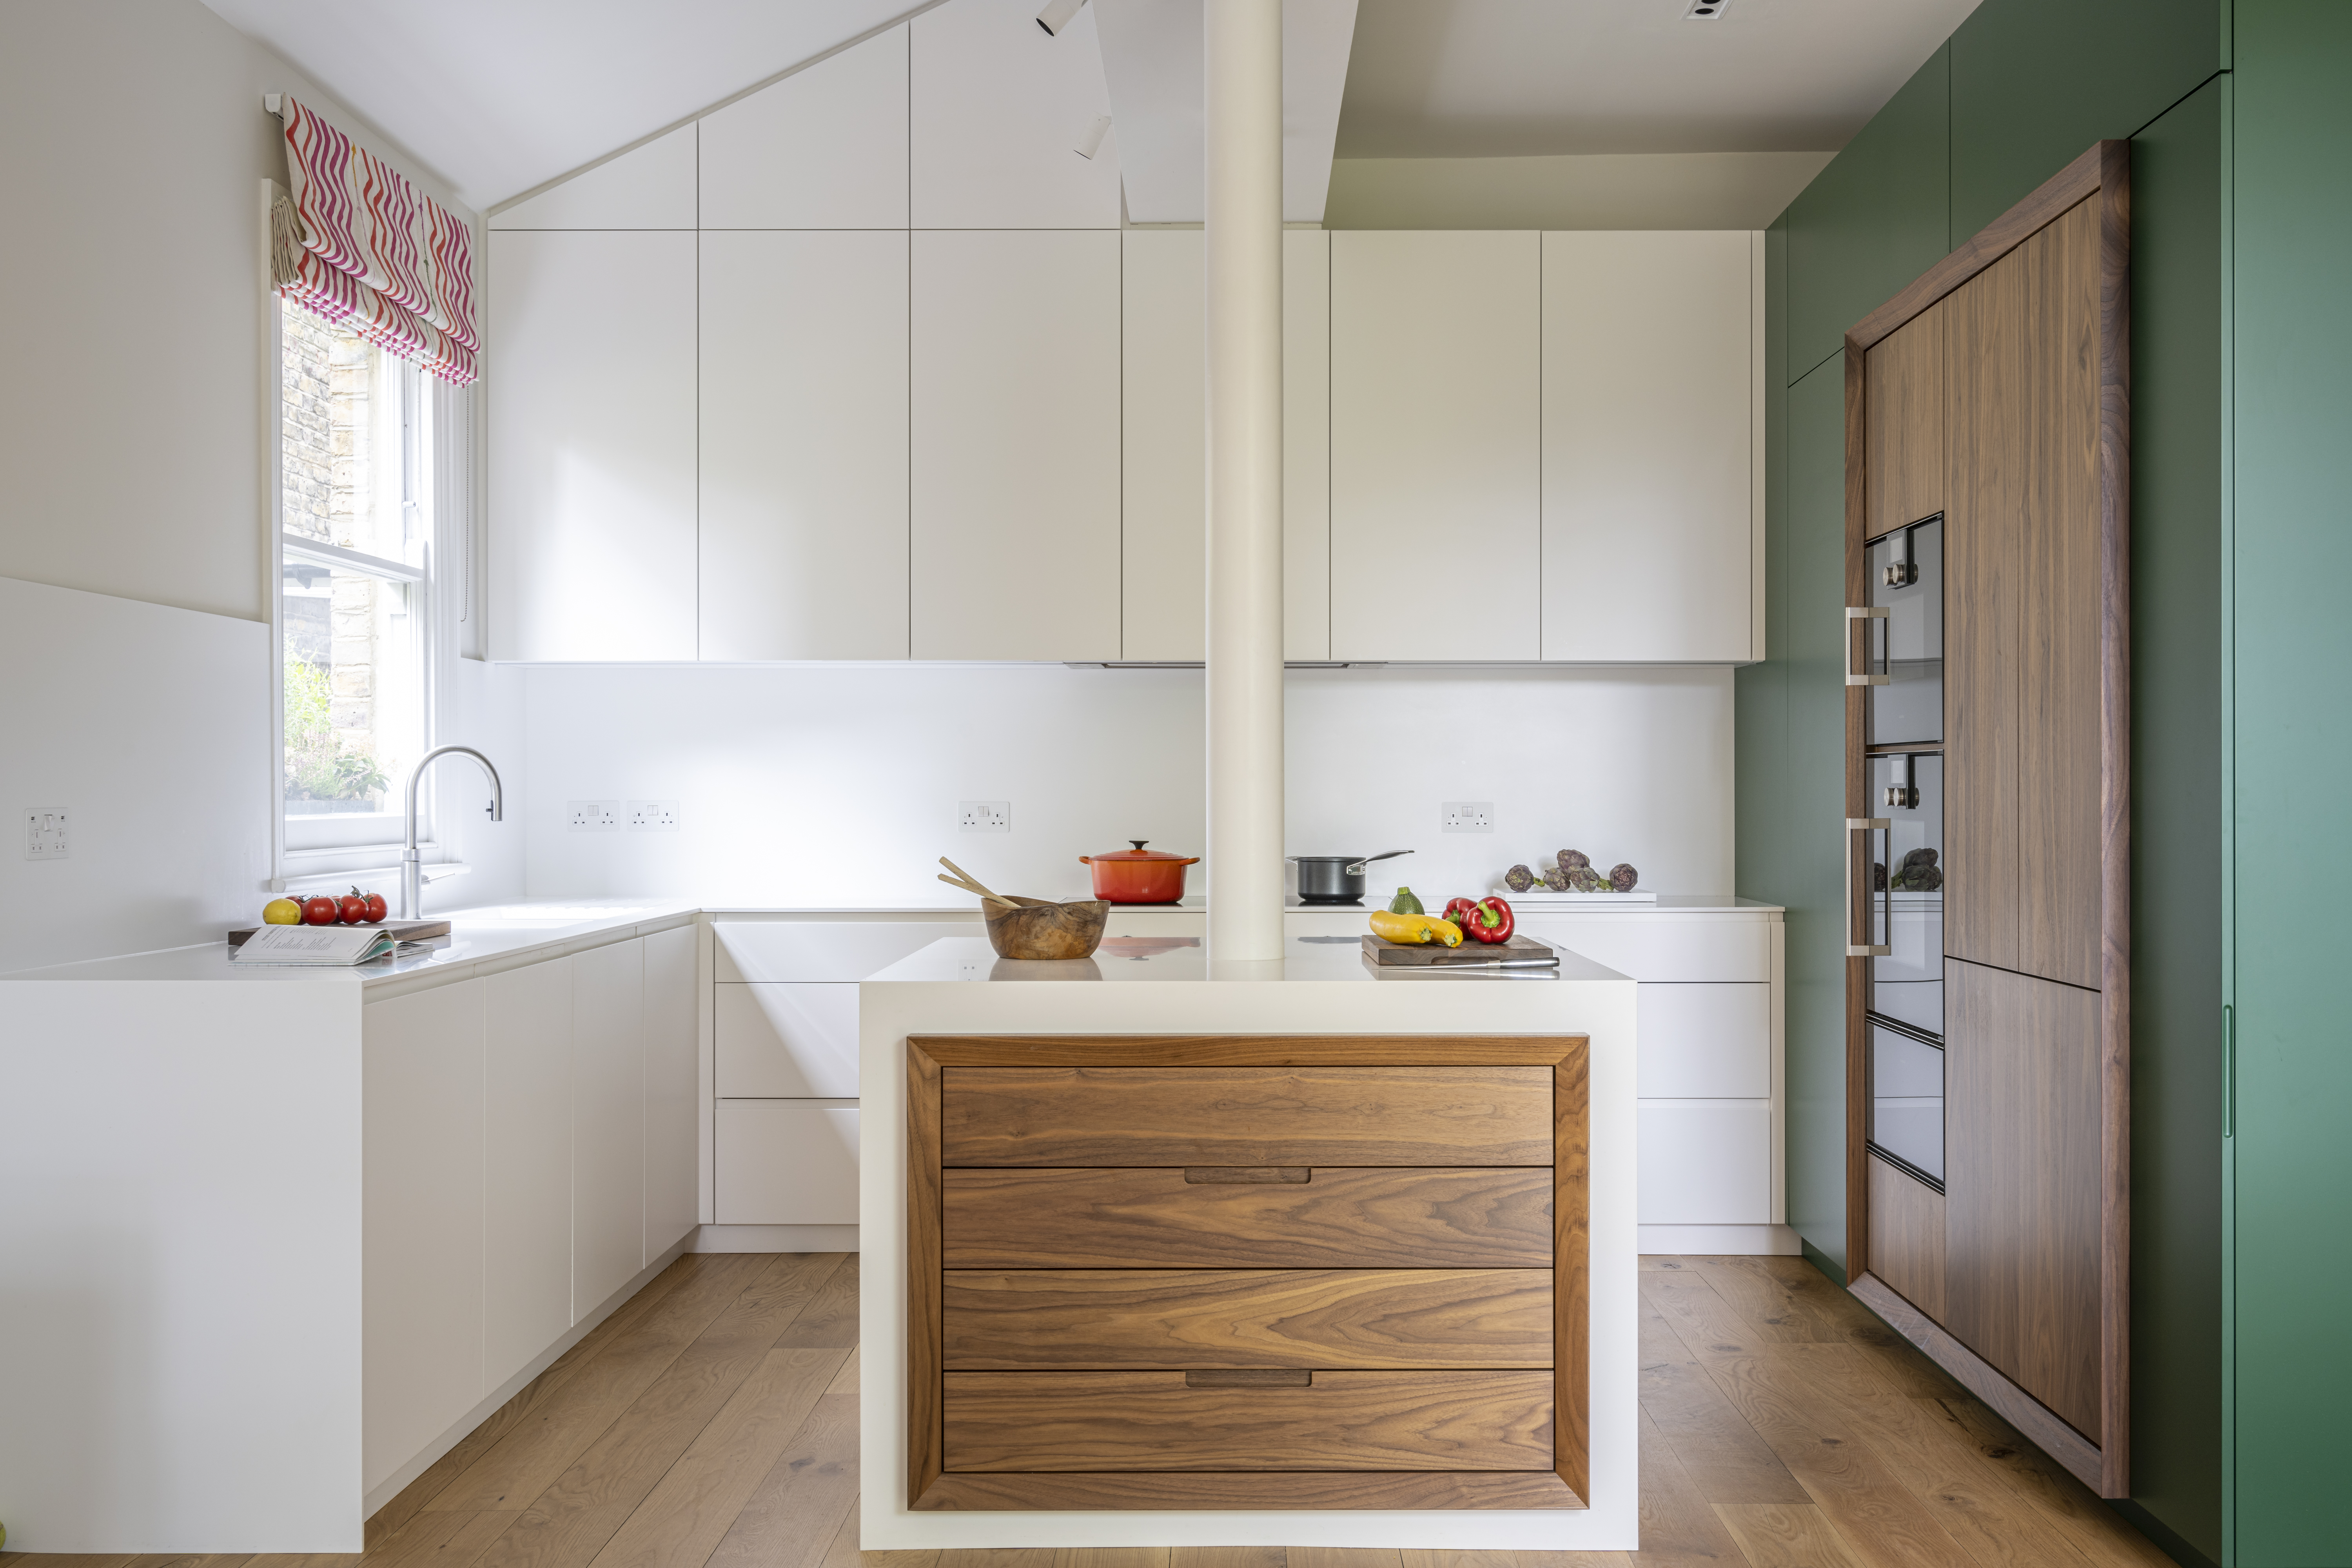 Bespoke kitchen with walnut highlights and a Corian worktop and island